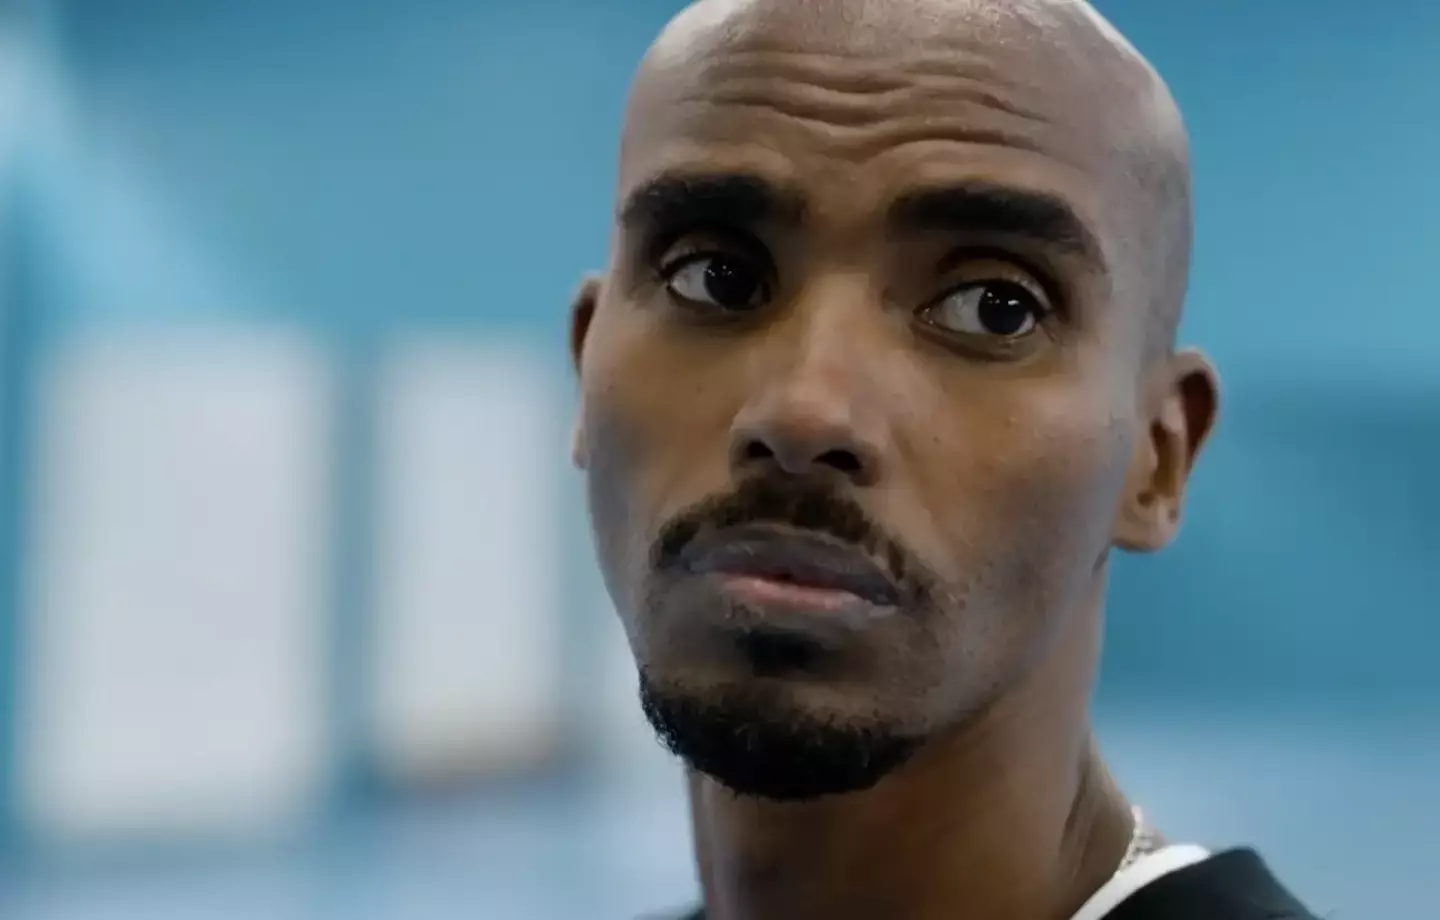 Sir Mo Farah opens up about his tragic childhood in the BBC documentary The Real Mo Farah.